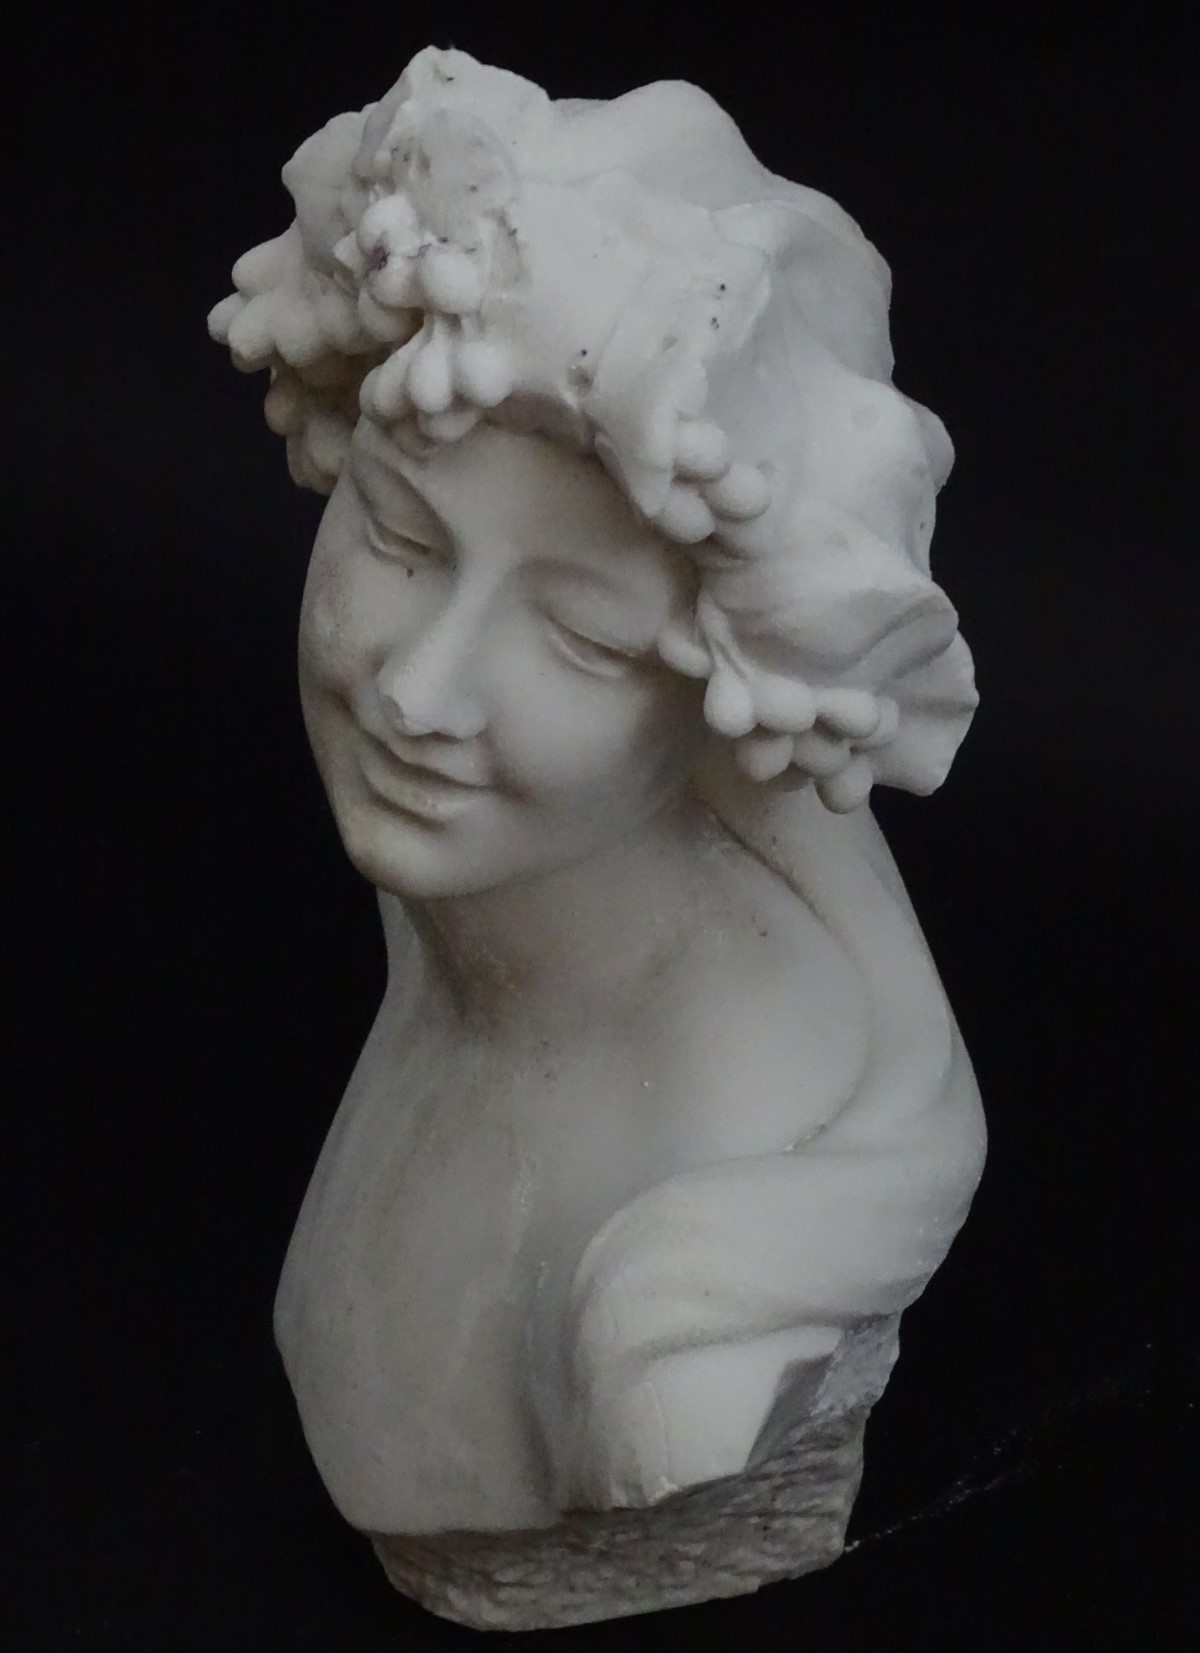 A reconstituted marble sculpture: bust of Bacchus, Roman God of Wine, Agriculture and fertility. - Image 5 of 18